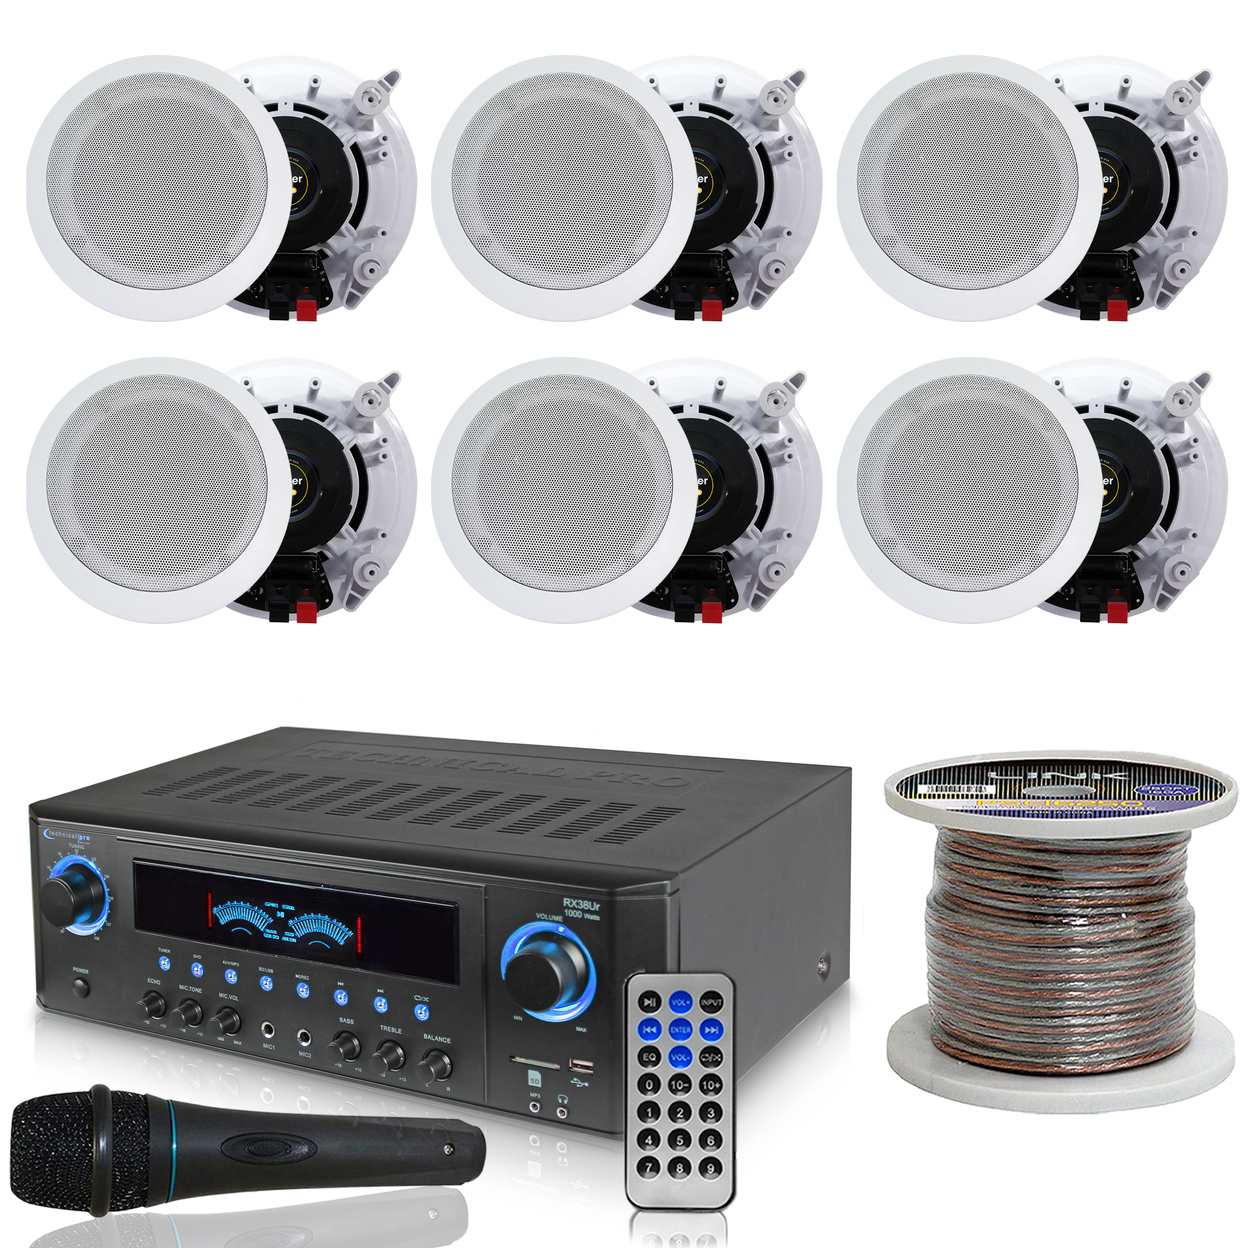 TPro 1000 W Home Stereo Receiver W 3 Pairs (Qty 6) Of 5.25 Ceiling Wall Mount Frame-less Speakers - Microphone & 16 Gauge 250 Ft. Zip Wire